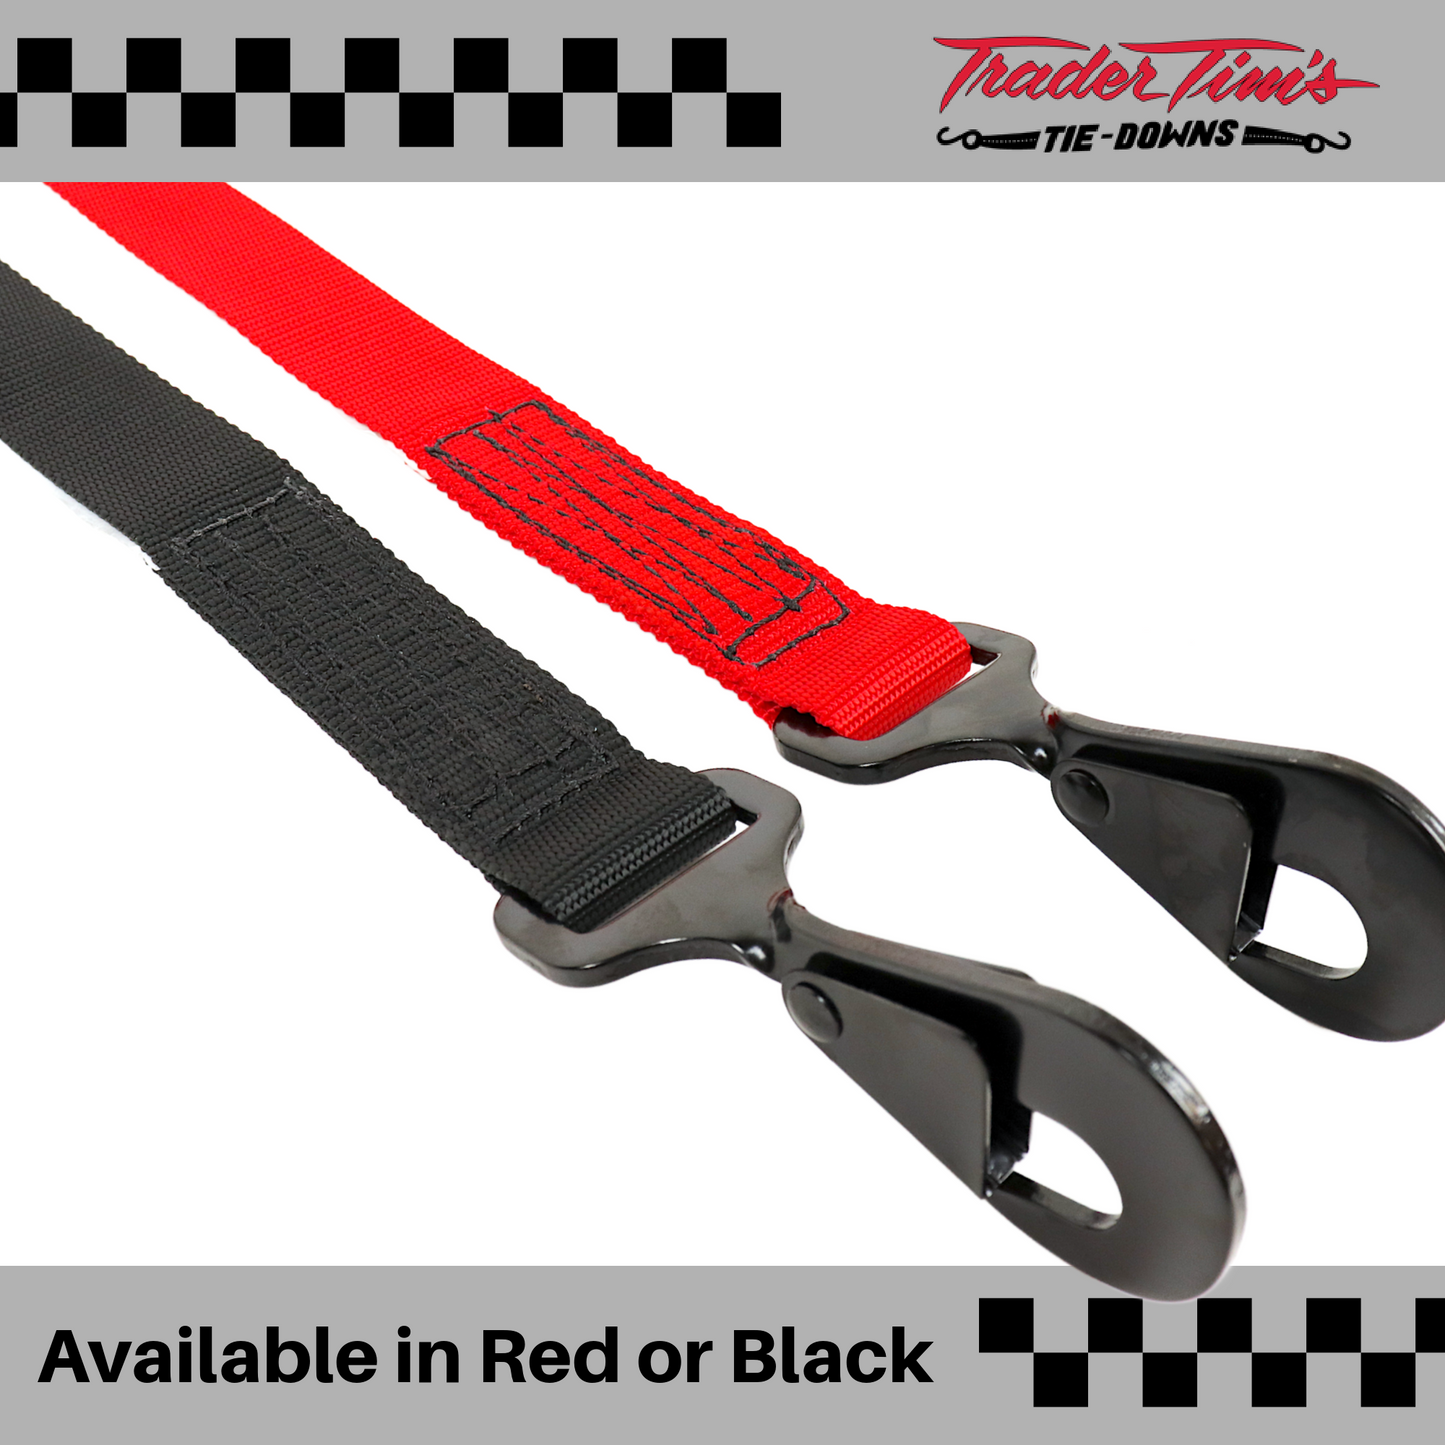 1.5" x 6' Ratchet Tie-Down with Soft-Tie - Red or Black